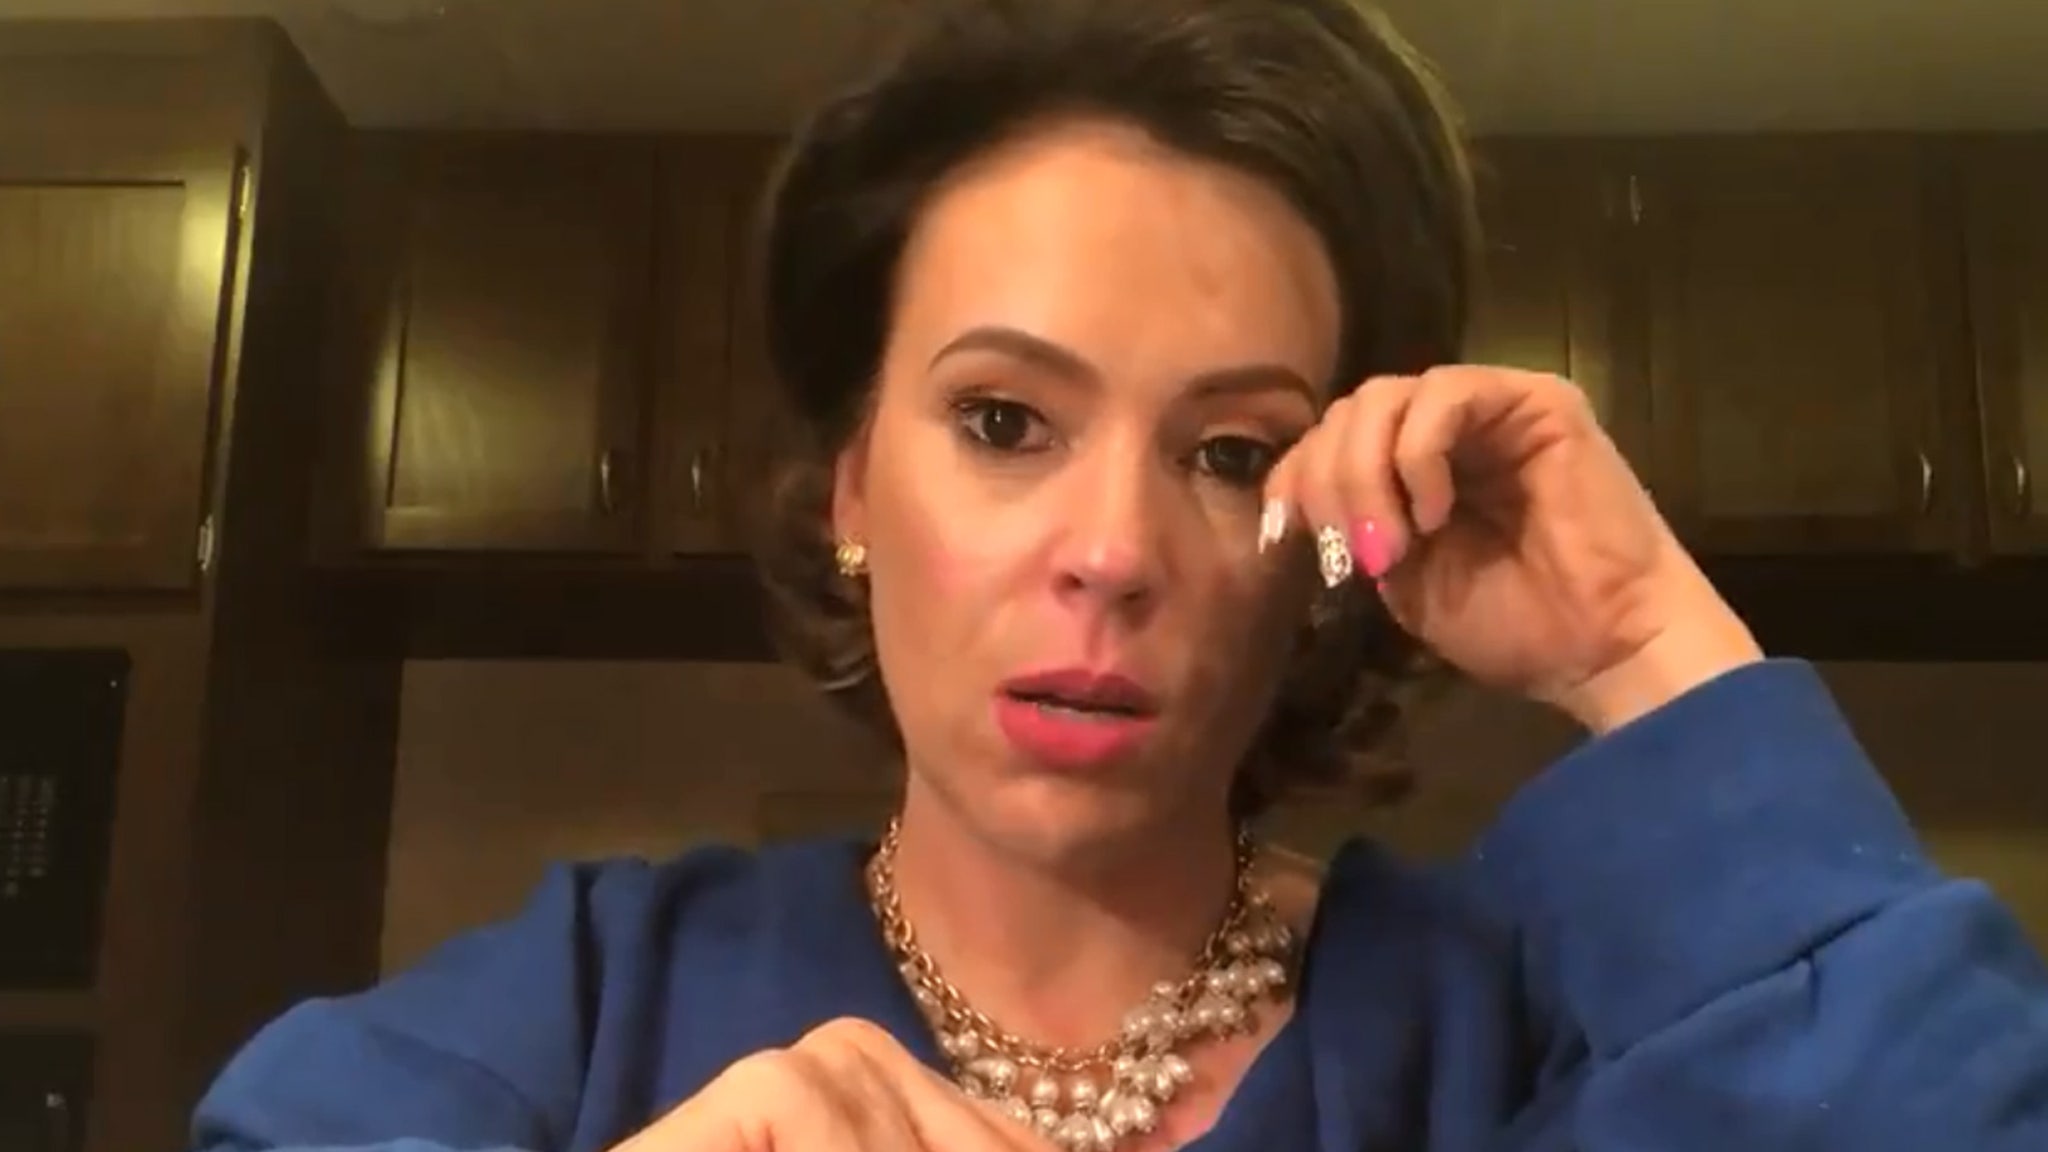 Alyssa Milano Explains To Her Daughter Why She Came Forward With Sexual Assault Story In